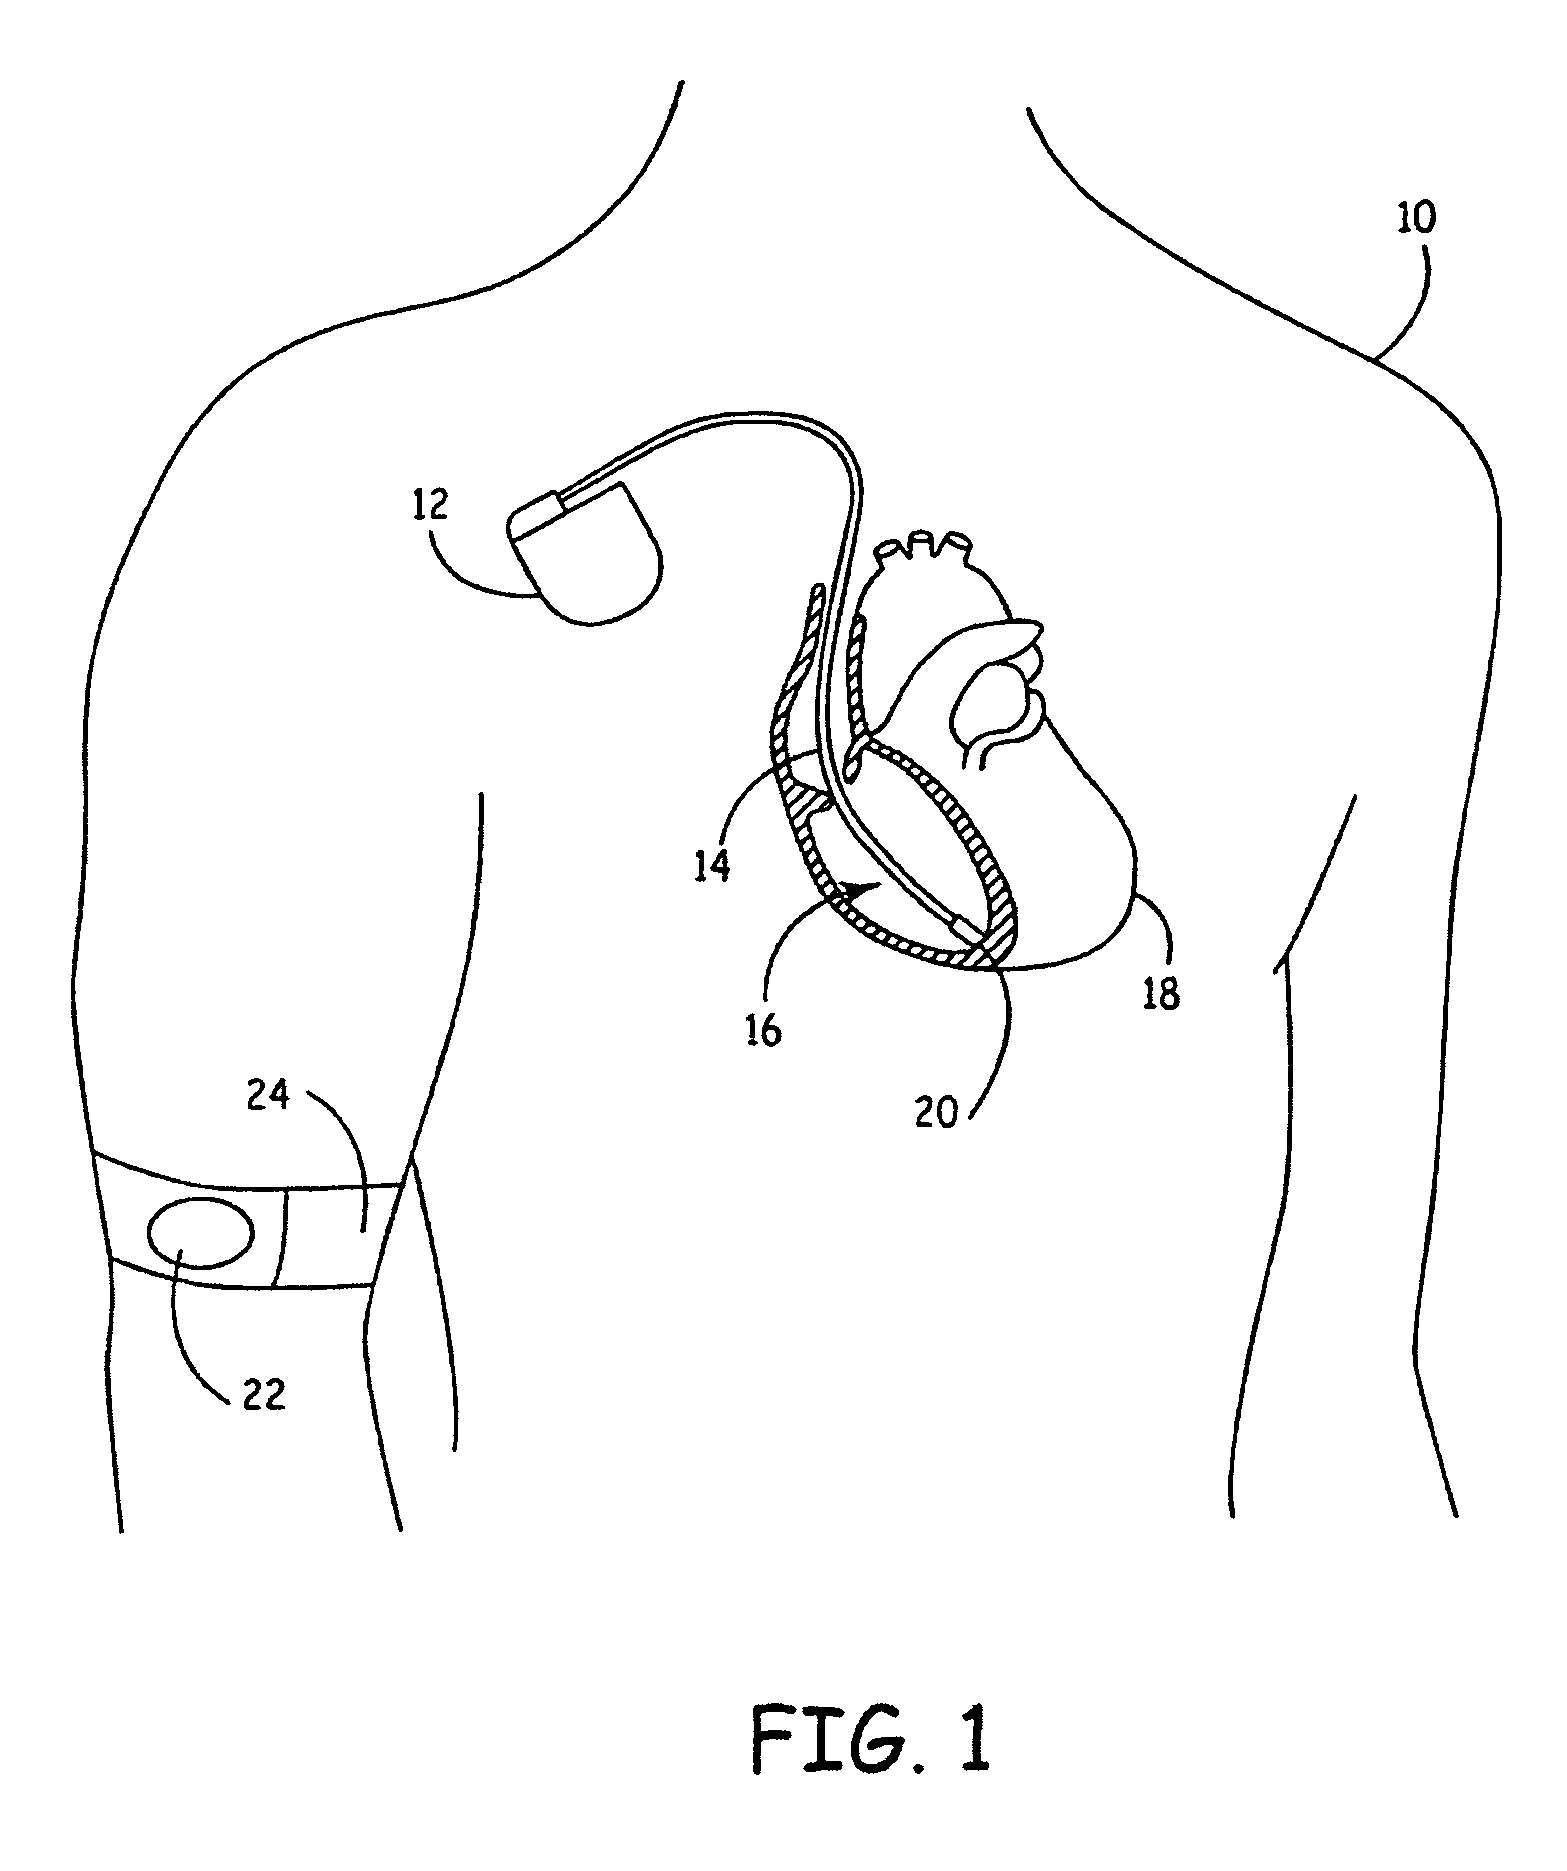 Fault tolerant implantable pulse generators and implantable cardioverter-defibrillators incorporating physiologic sensors and methods for implementing fault tolerance in same